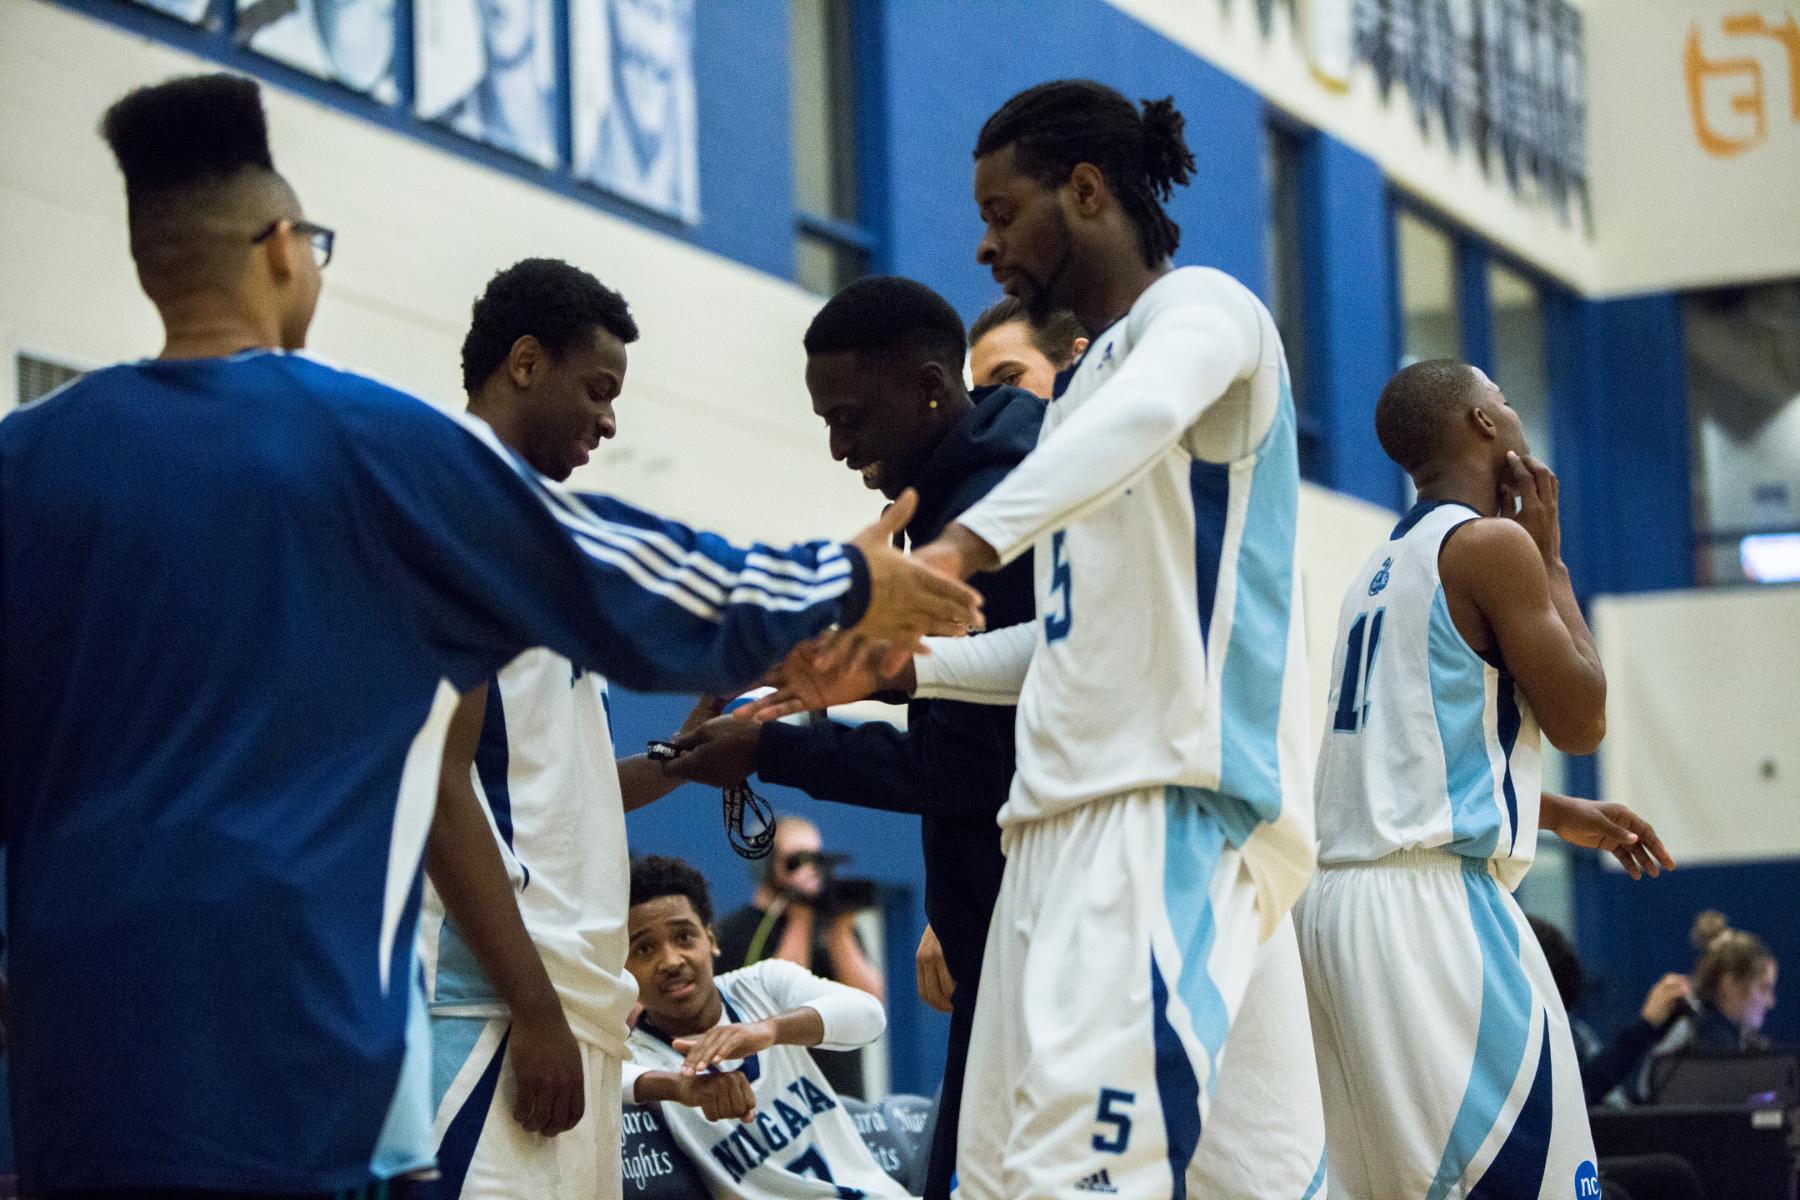 RECAP: Buzzer beater propels Knights to victory